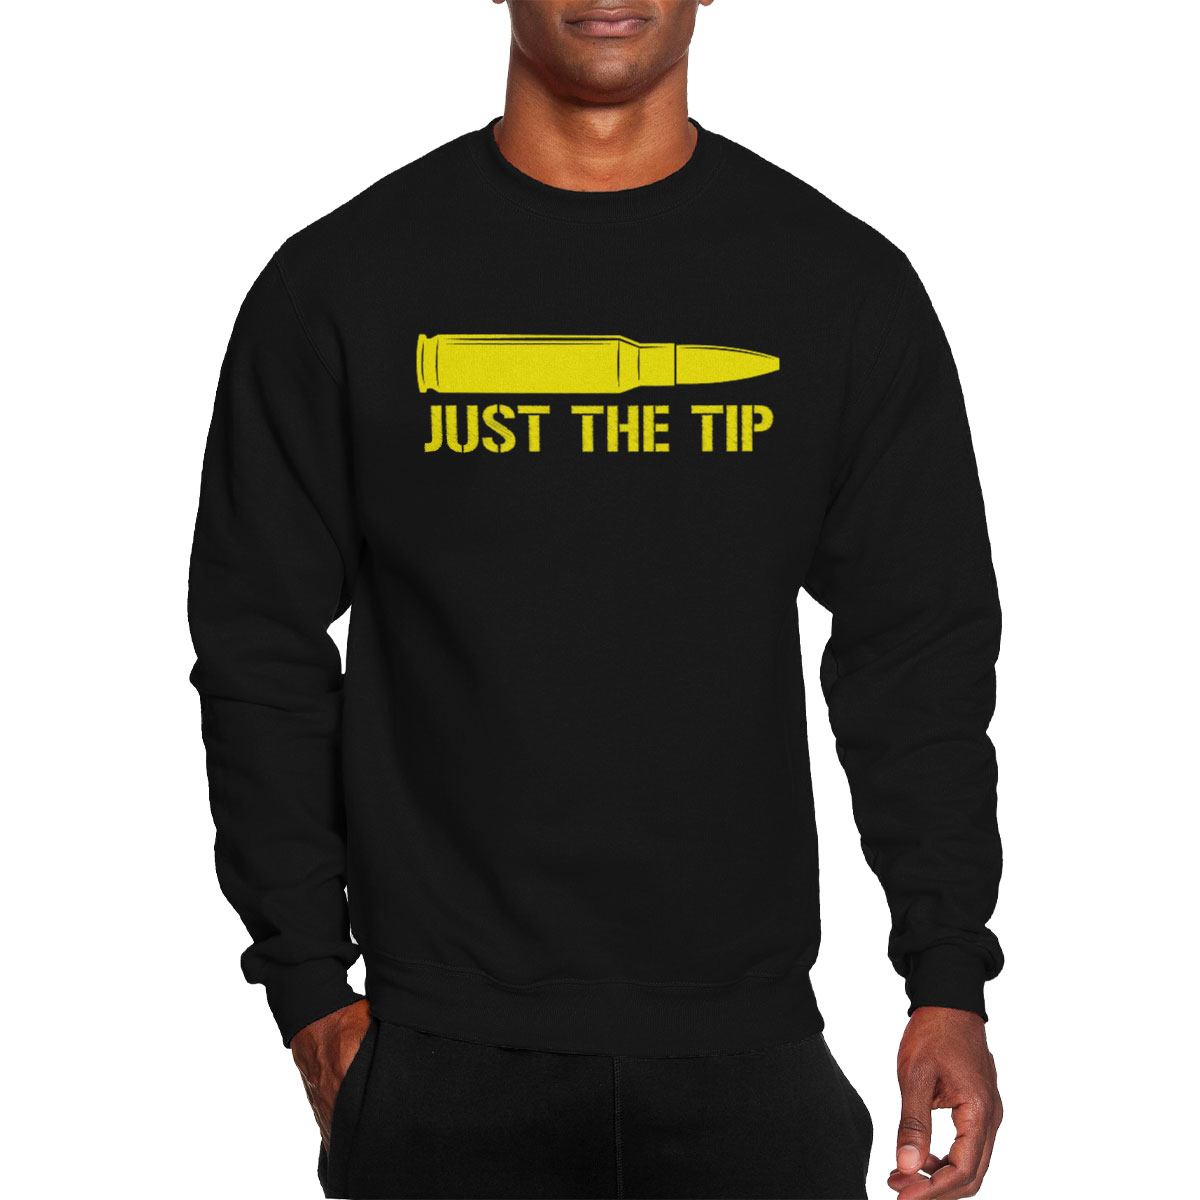 Just The Tip Bullet Funny Quotes Sayings Sexual Innuendo Men's Crewneck  Sweater | eBay